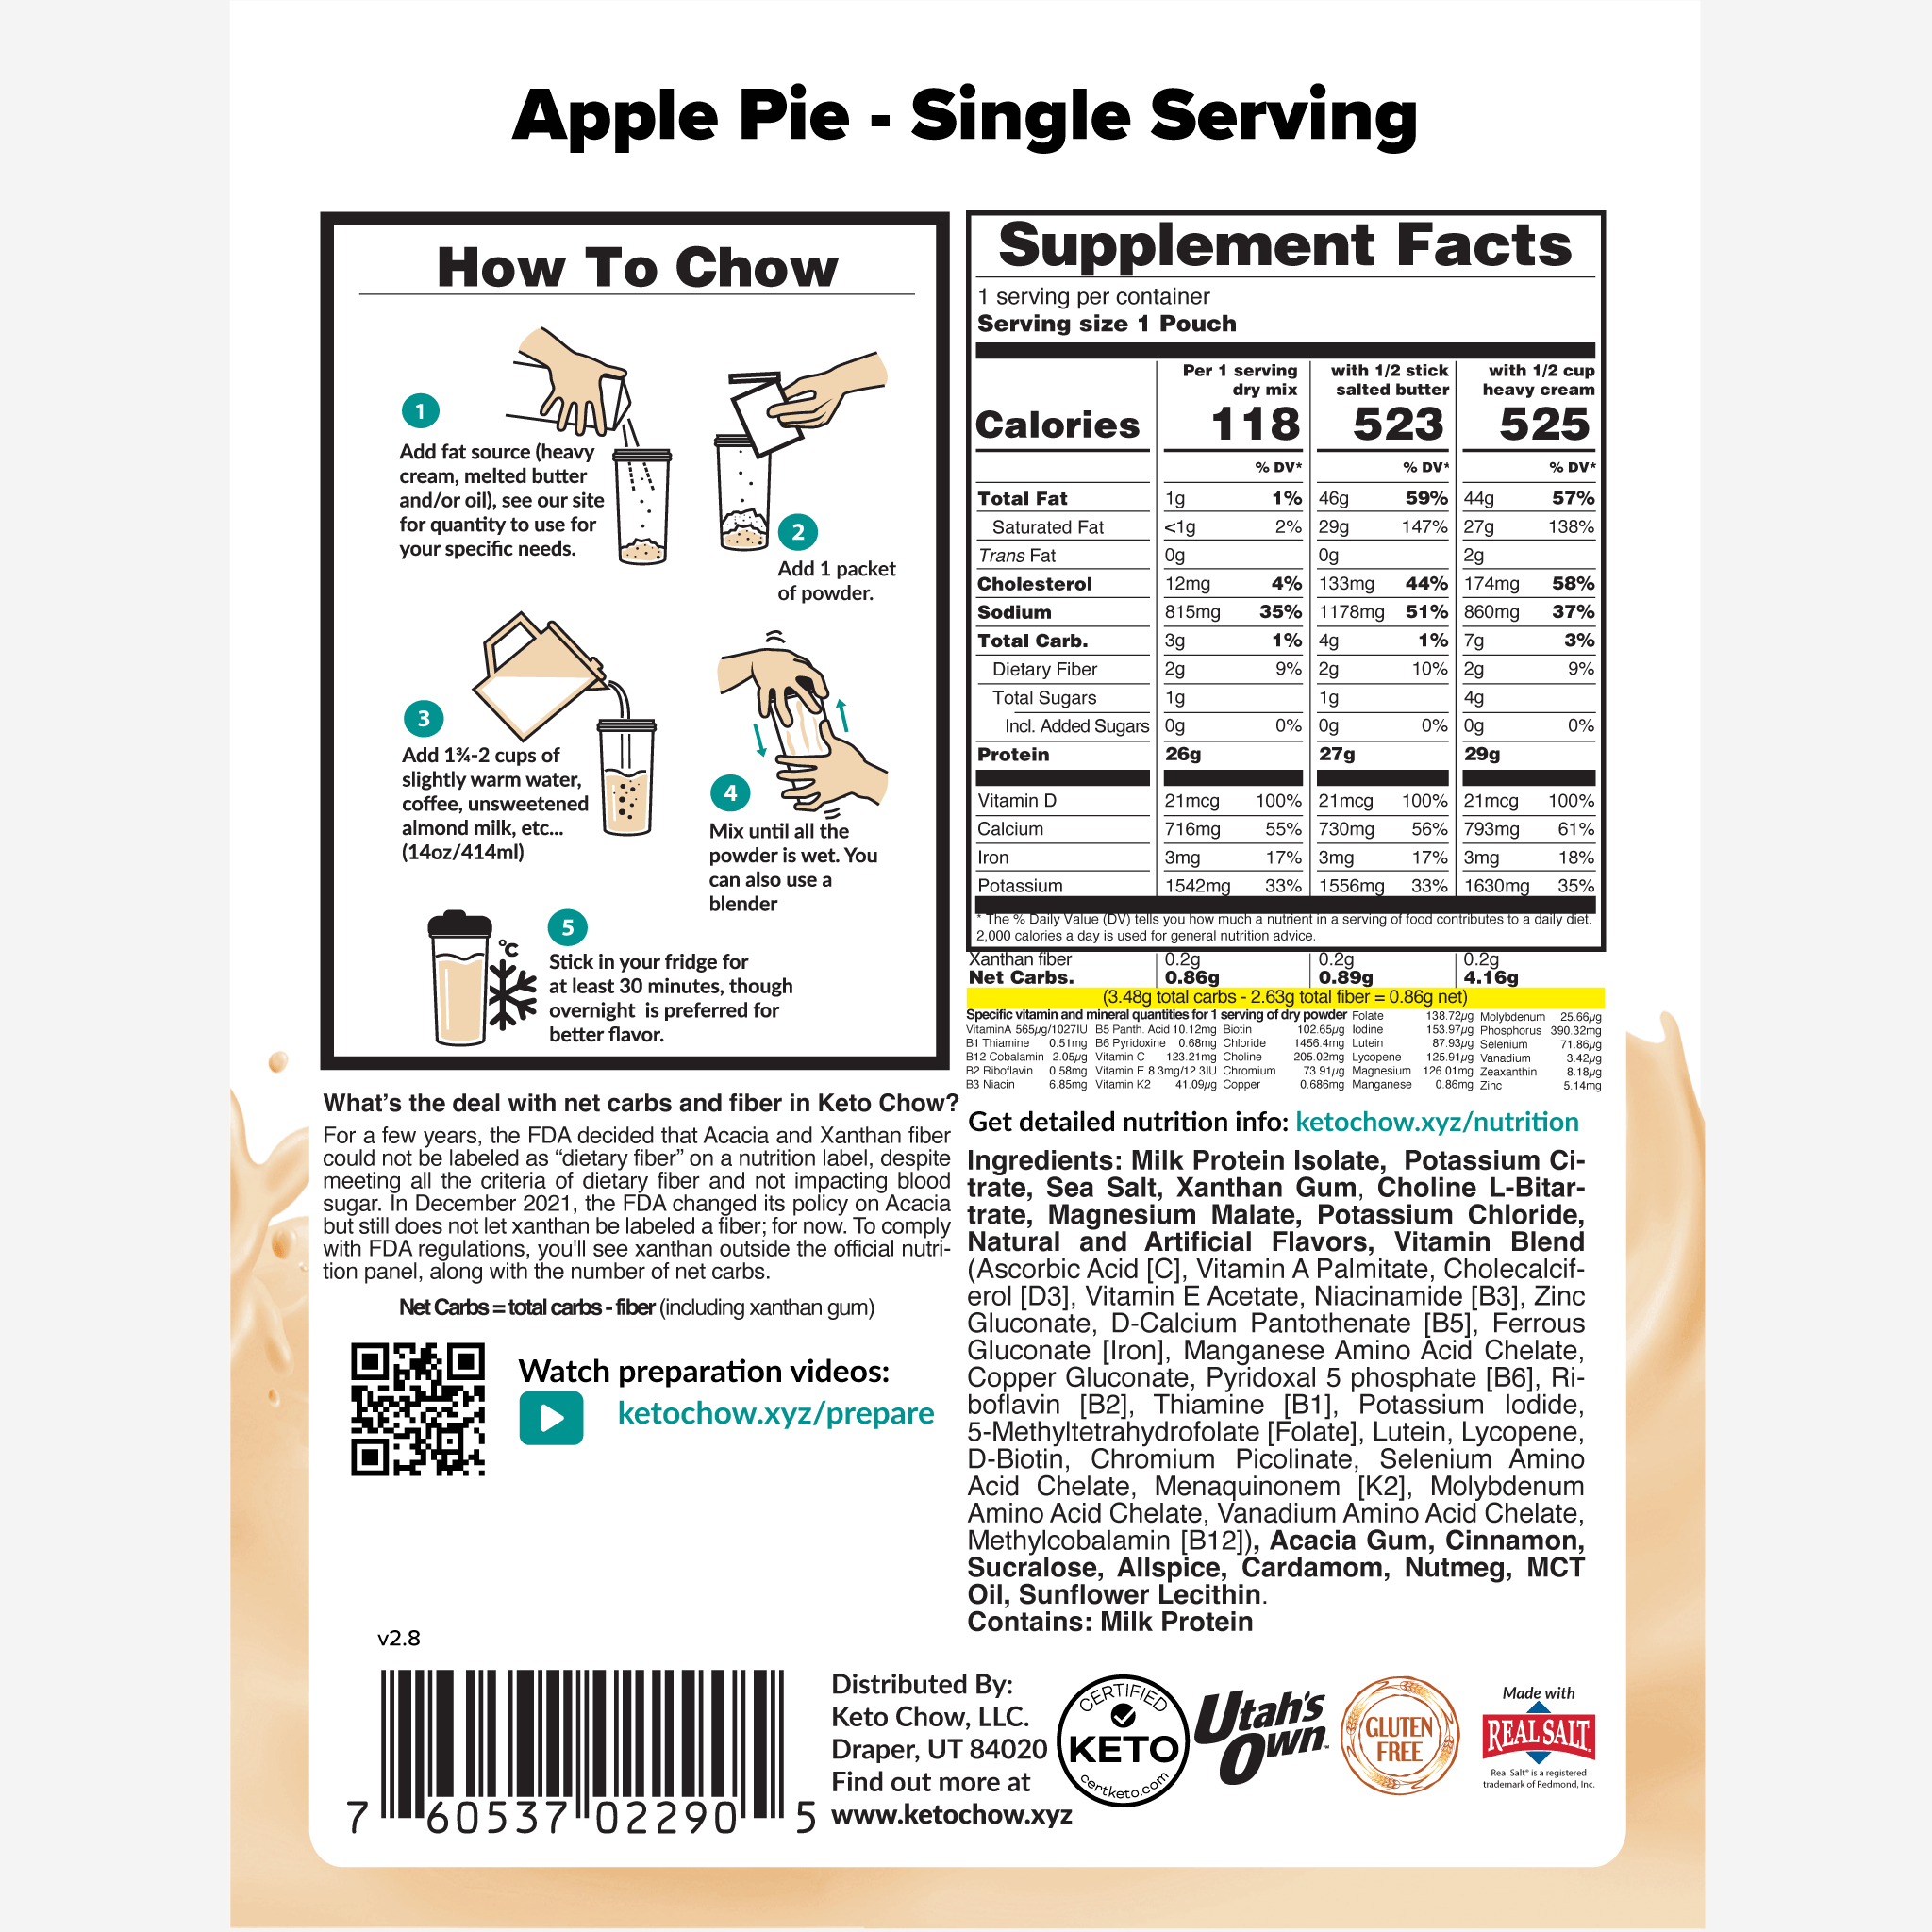 Apple Pie Keto Chow package back